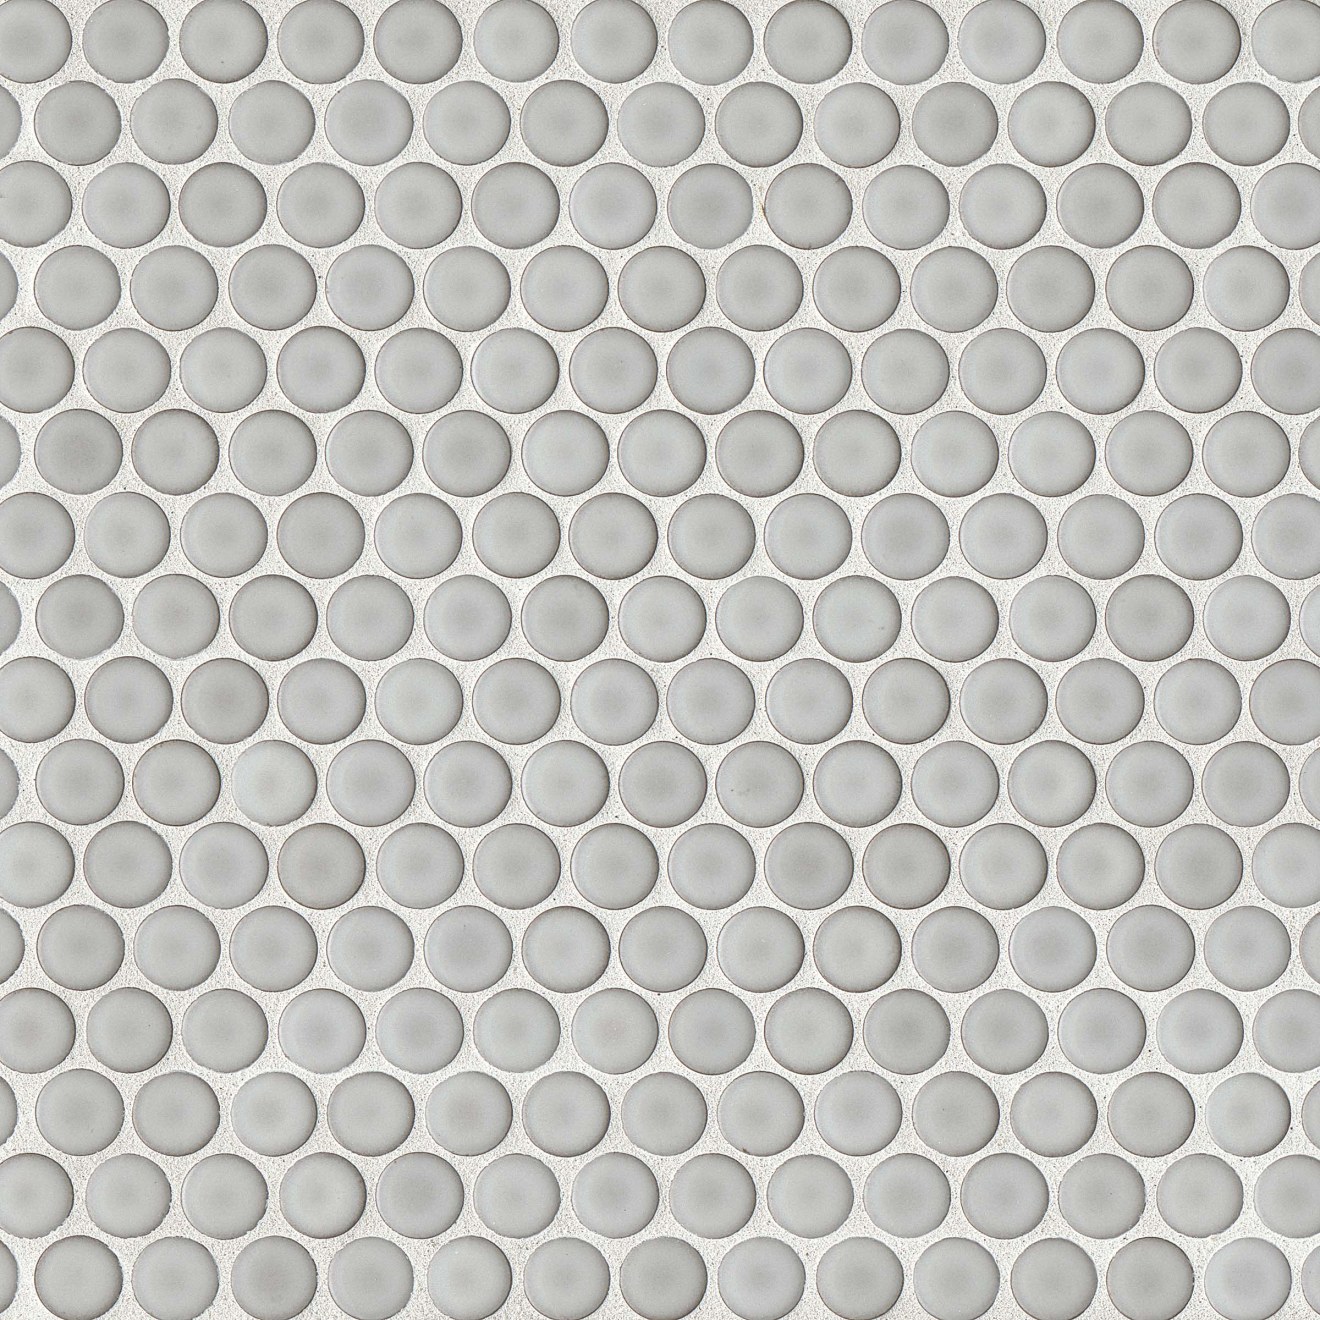 360 3/4" x 3/4" Penny Round Glossy Mosaic Tile in Dove Grey | Bedrosians Tile & Stone